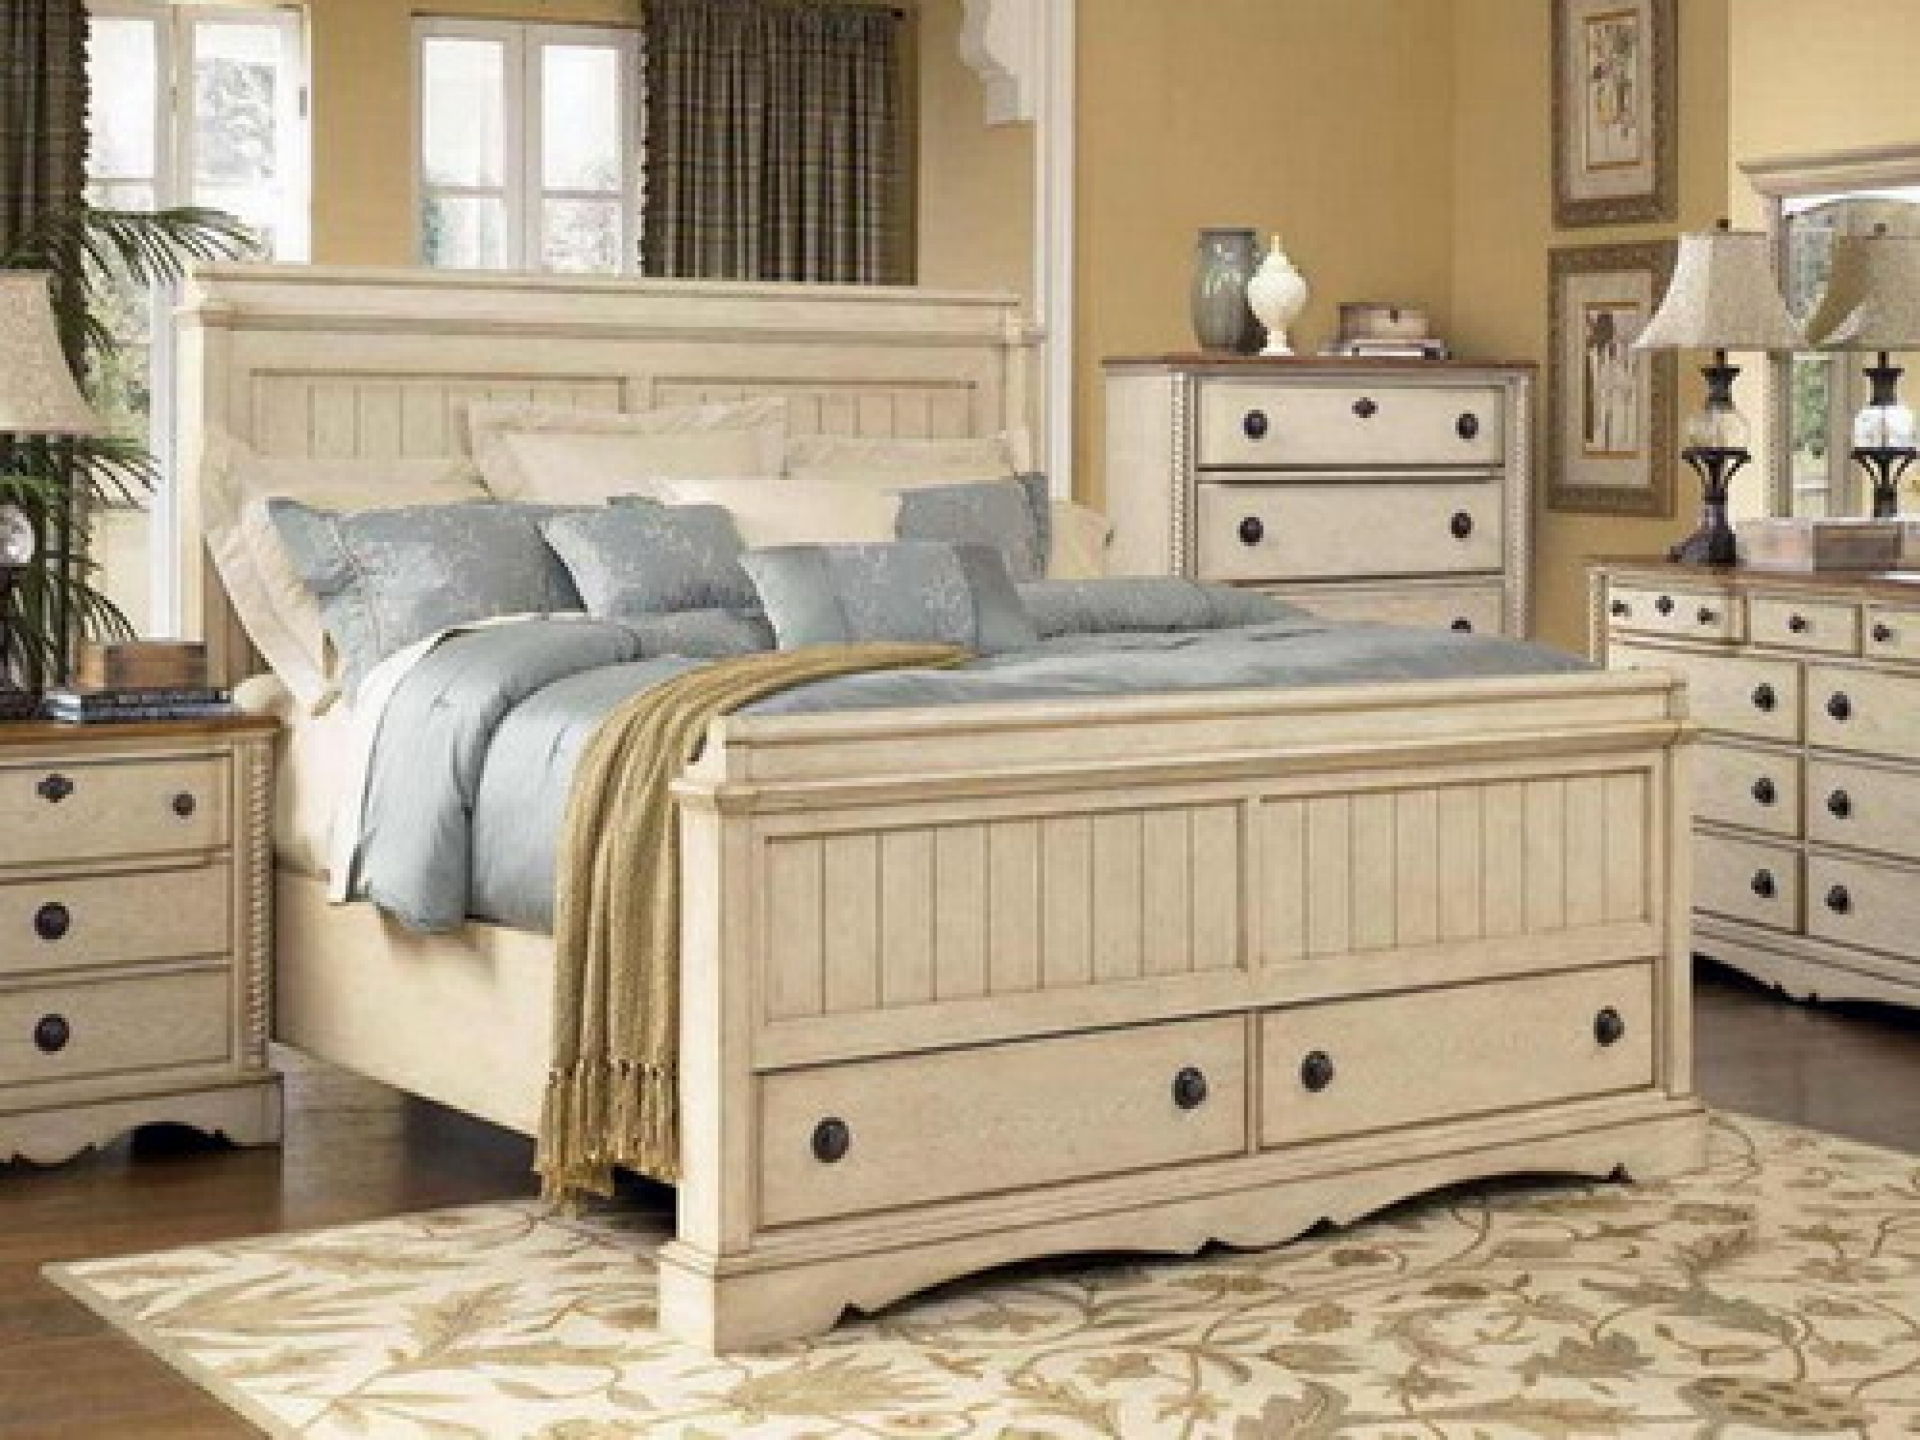 Off White Bedroom Furniture Cileather Home Design Ideas with regard to dimensions 1920 X 1440